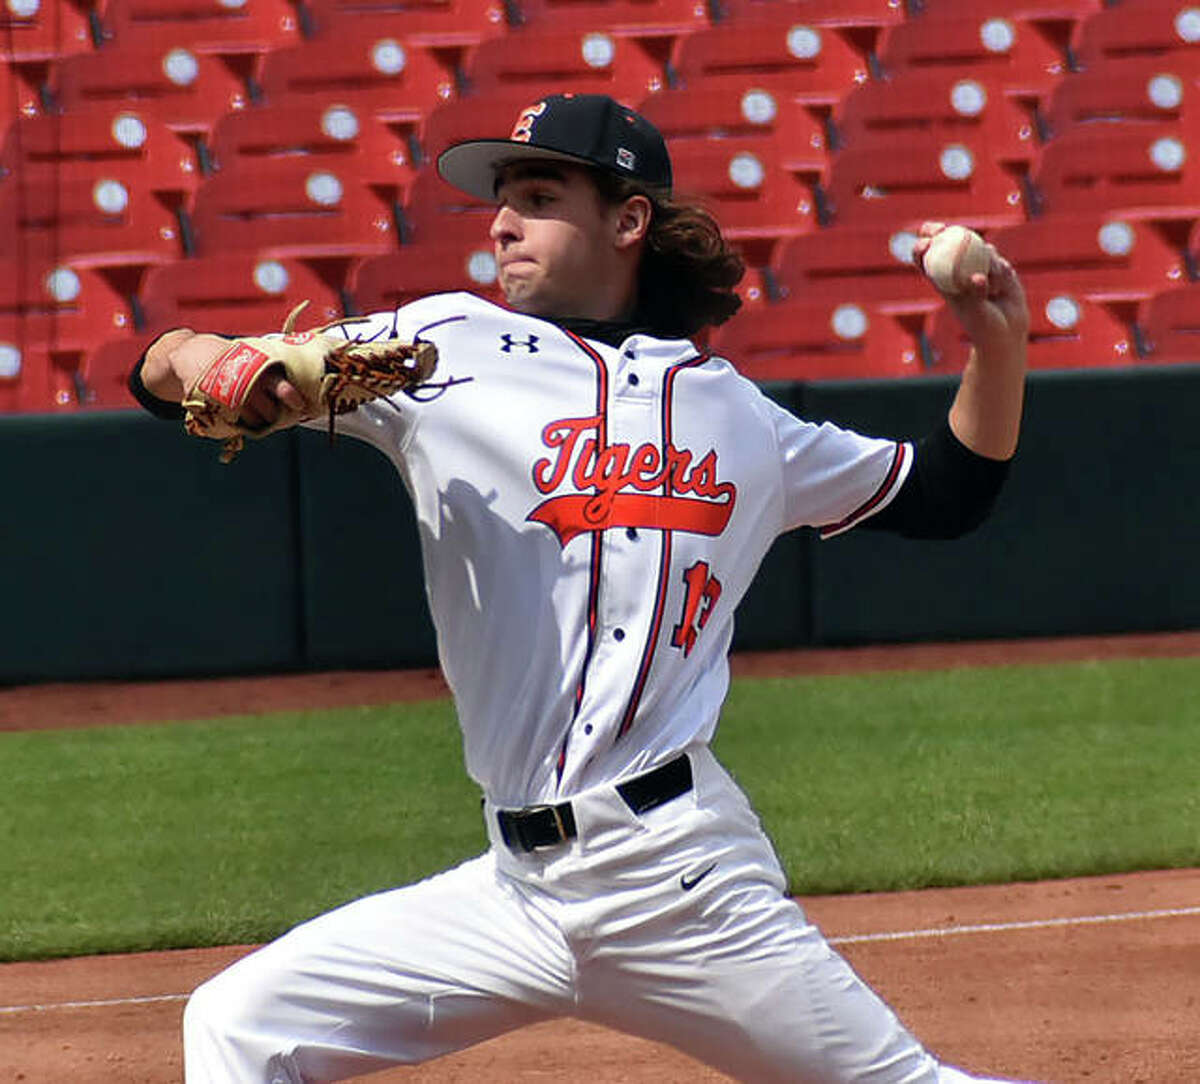 Edwardsville pitcher Conrad Heppler, shown throwing in a game at Busch Stadium in St. Louis earlier this season, picked up the win as the first of seven Tigers pitchers to throw Friday in a win over CM at the Bethalto Sports Complex.